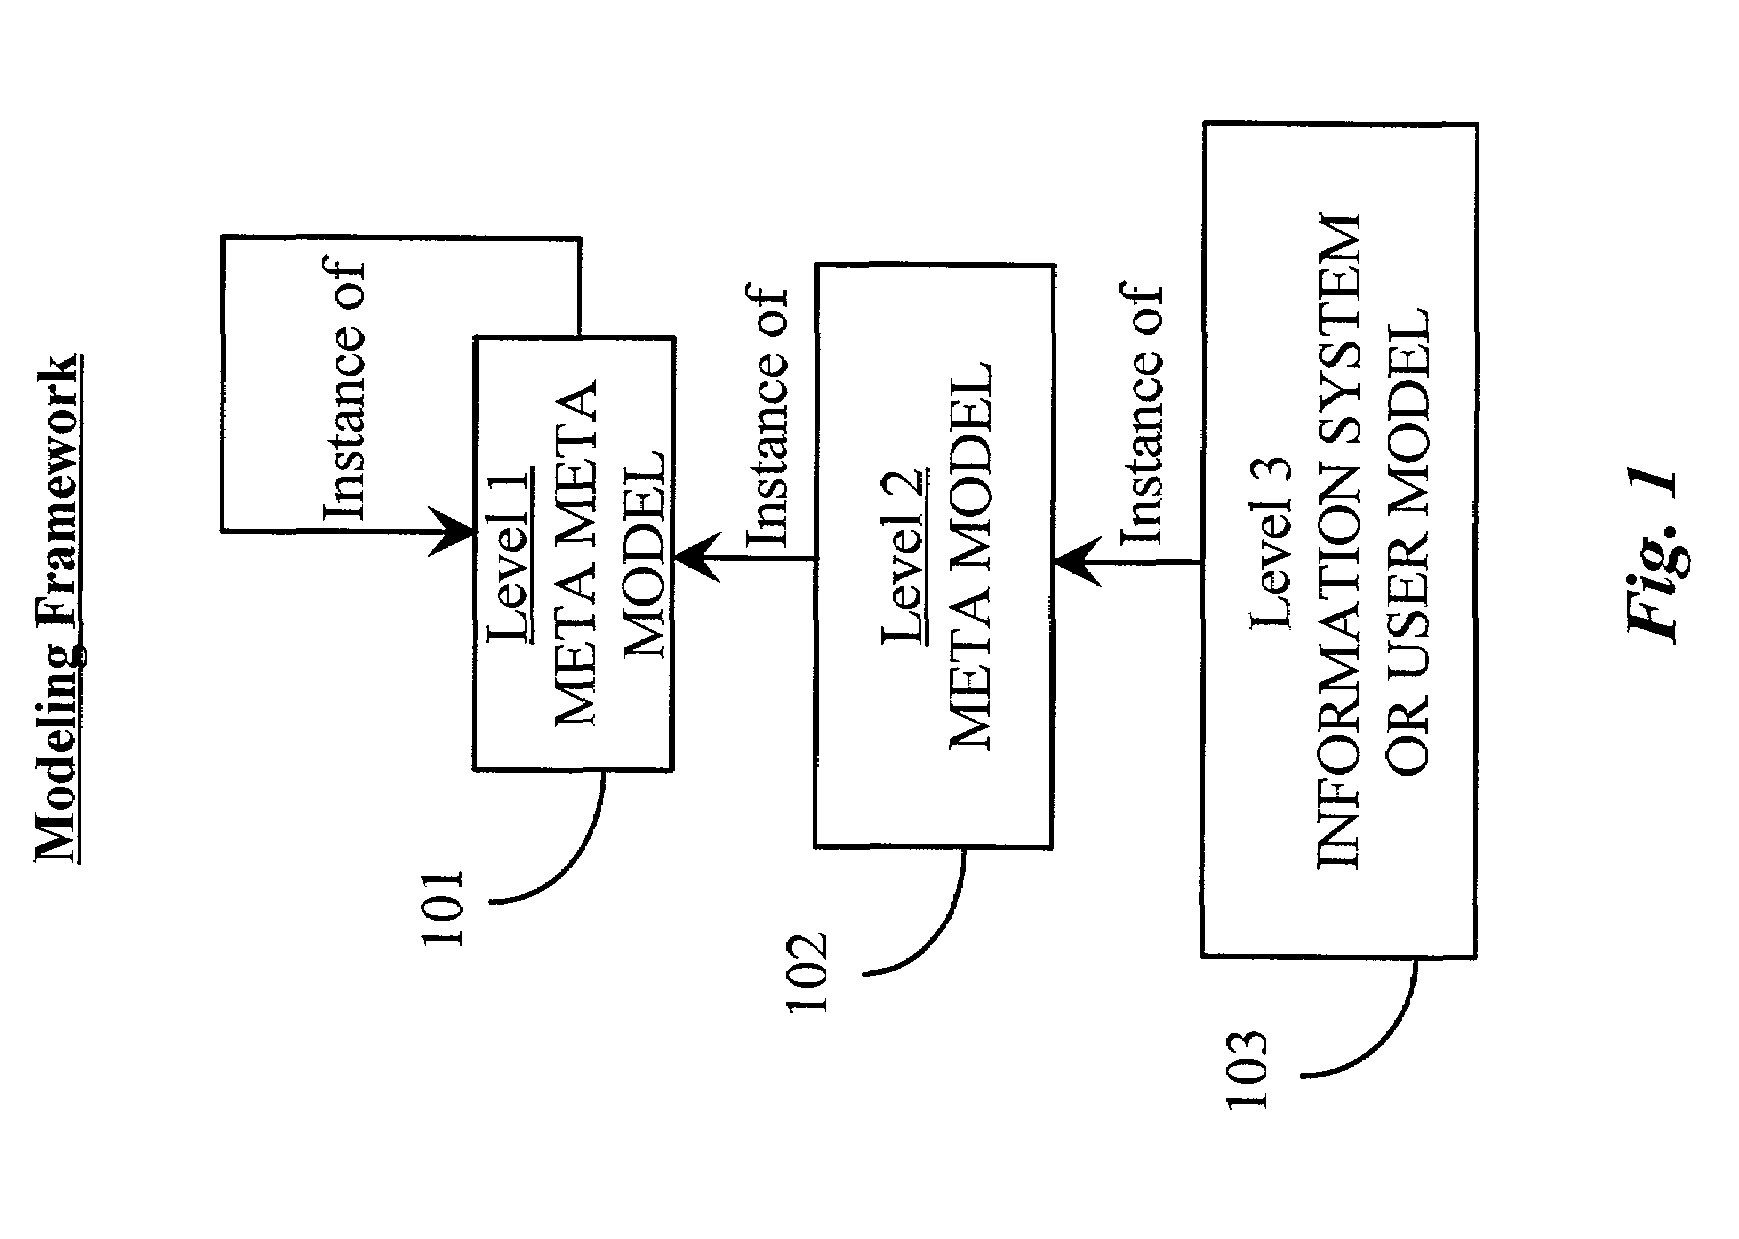 System and apparatus for programming system views in an object oriented environment